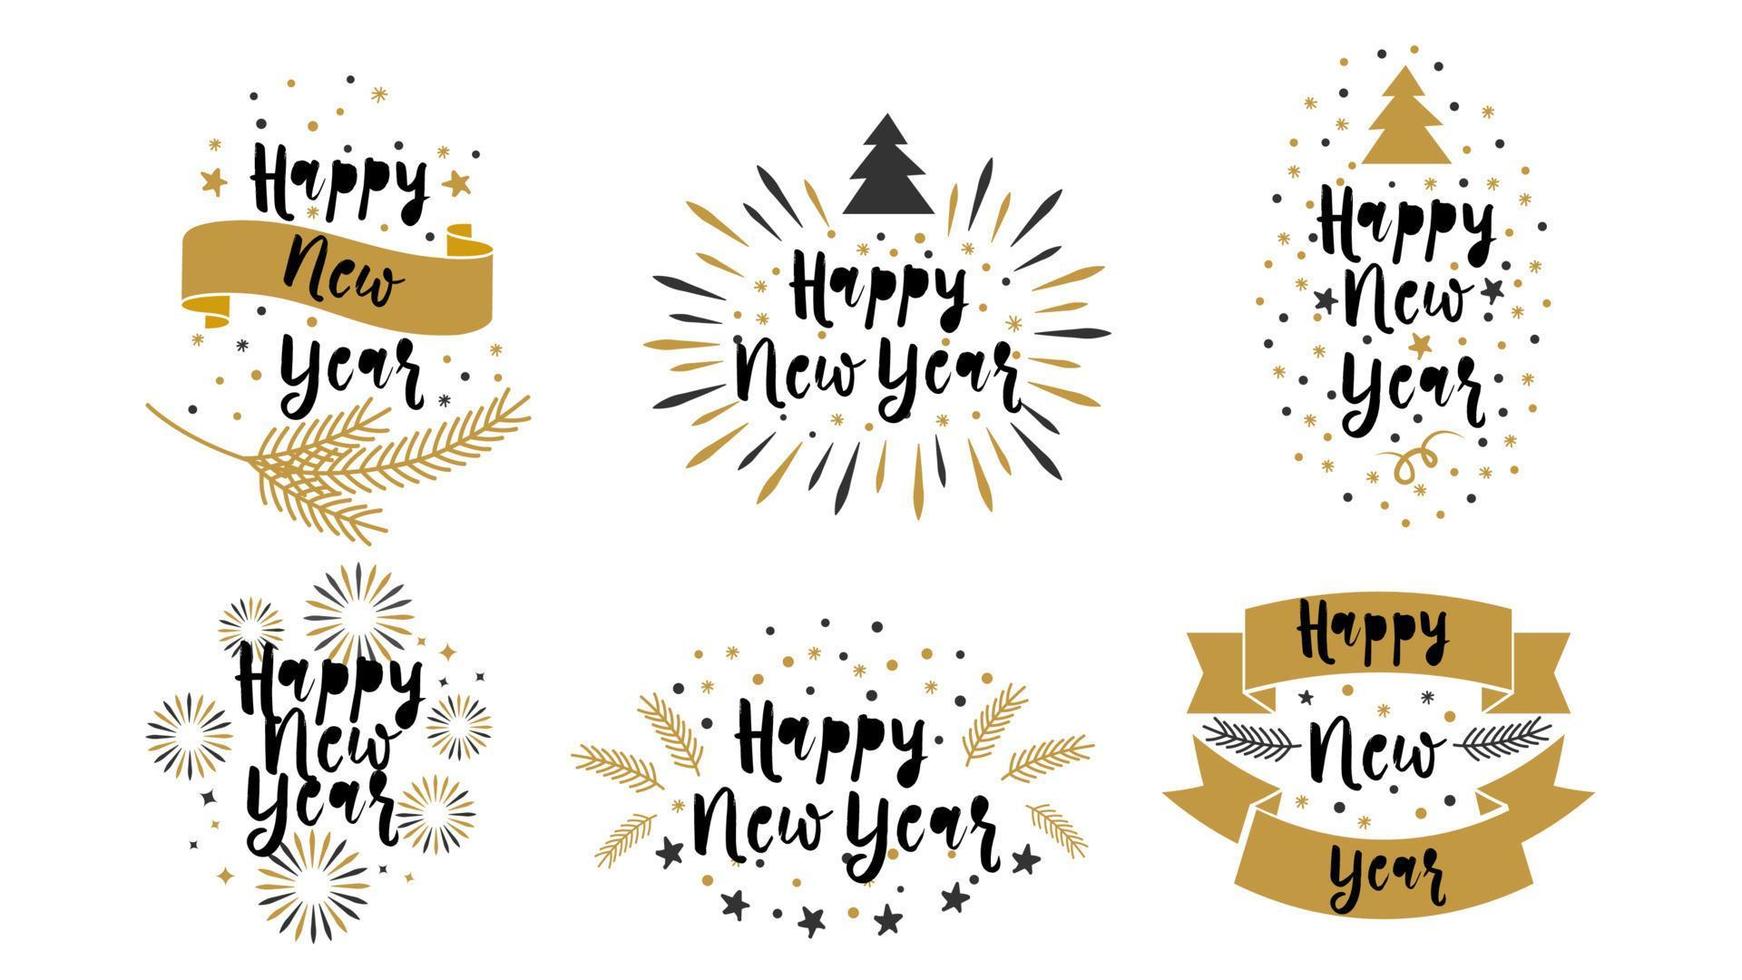 Happy New Year calligraphy lettering text design vector